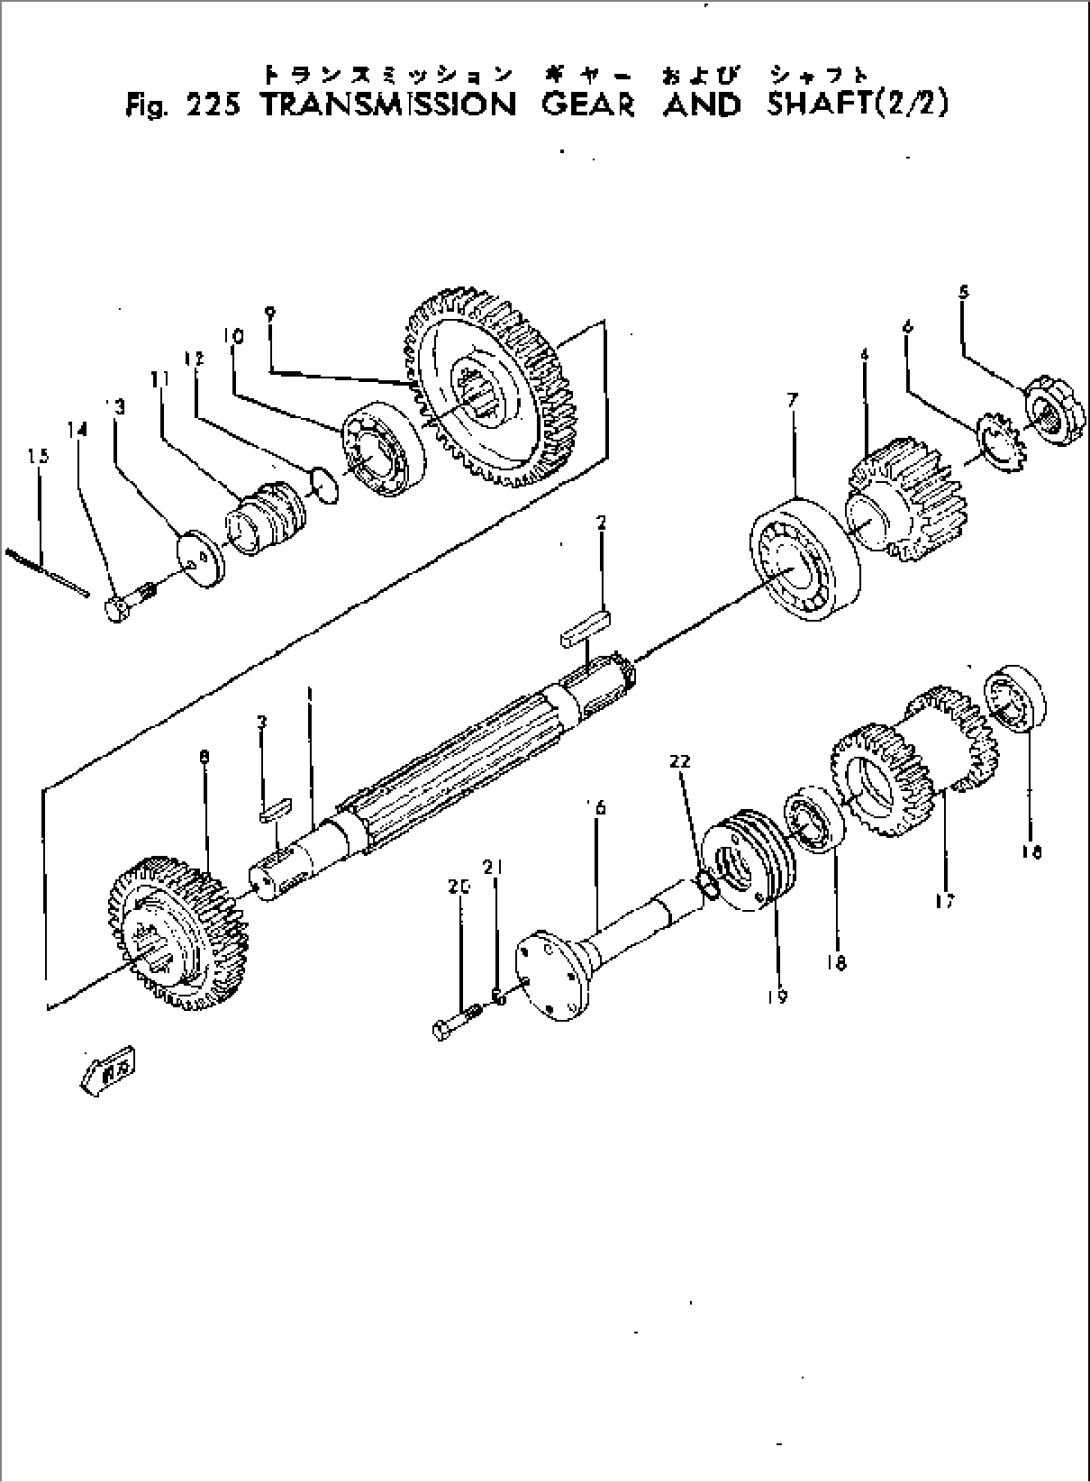 TRANSMISSION GEAR AND SHAFT (2/2)